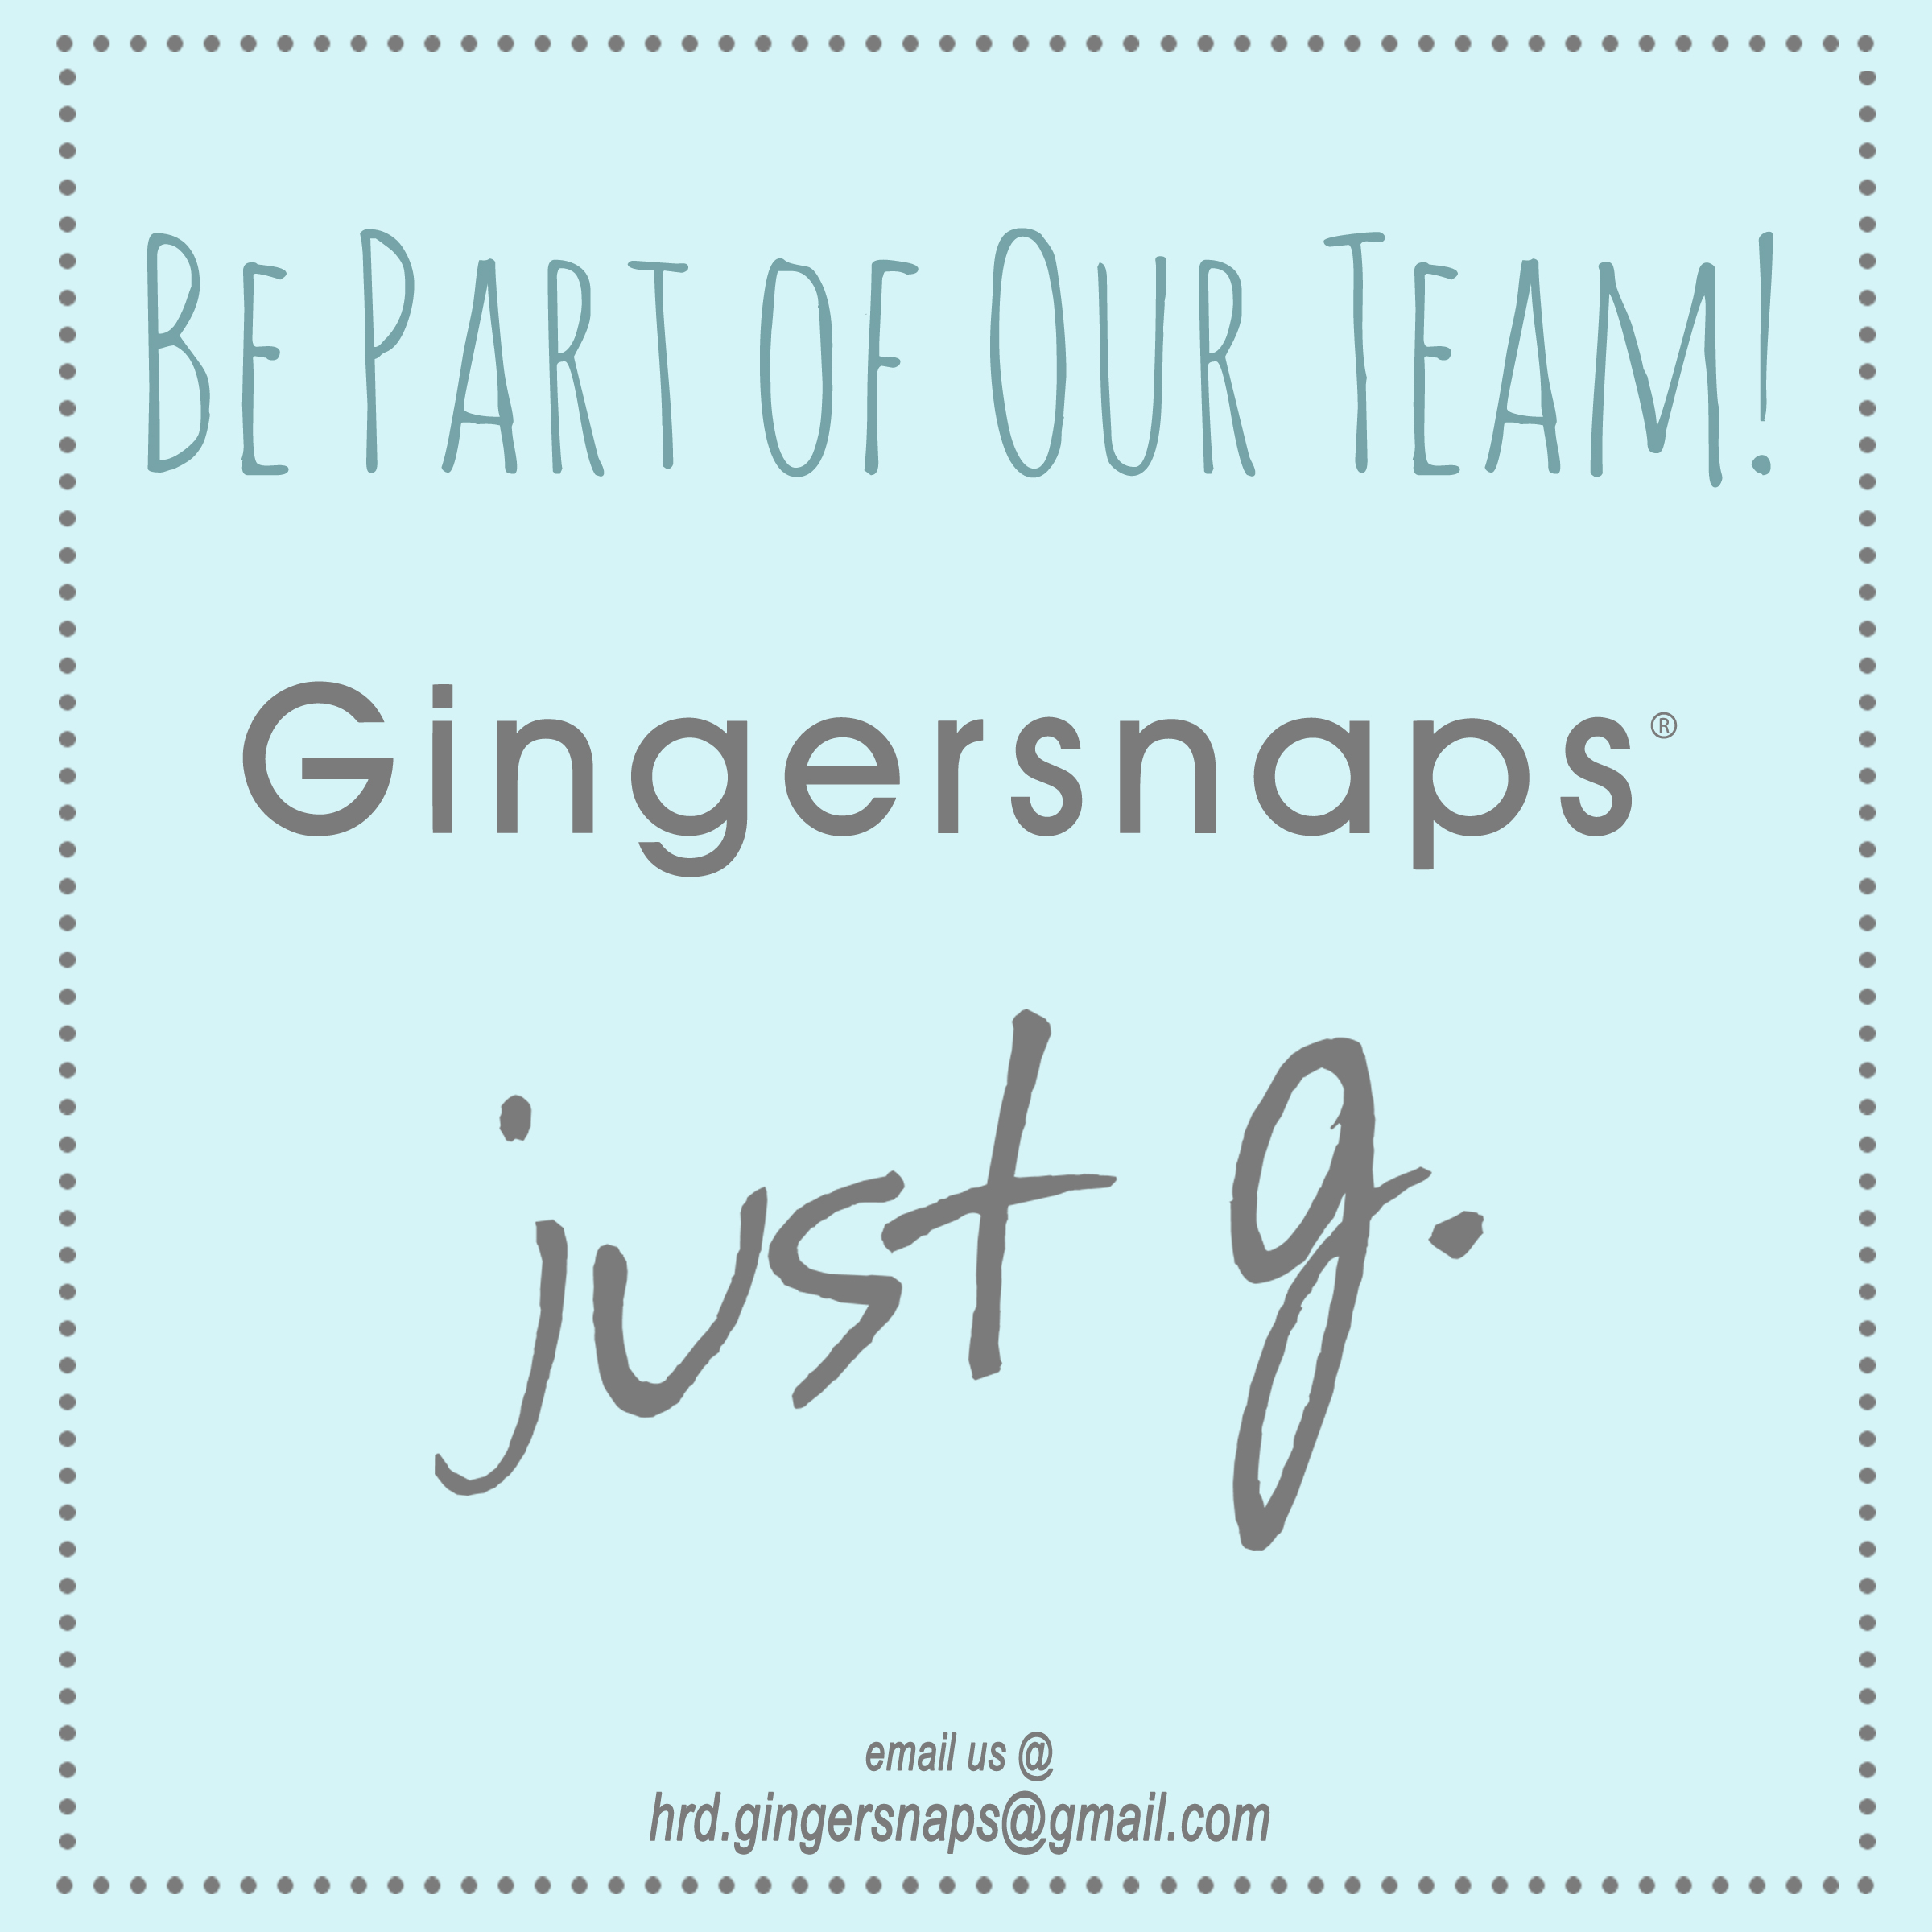 GINGERSNAPS/JUST-G